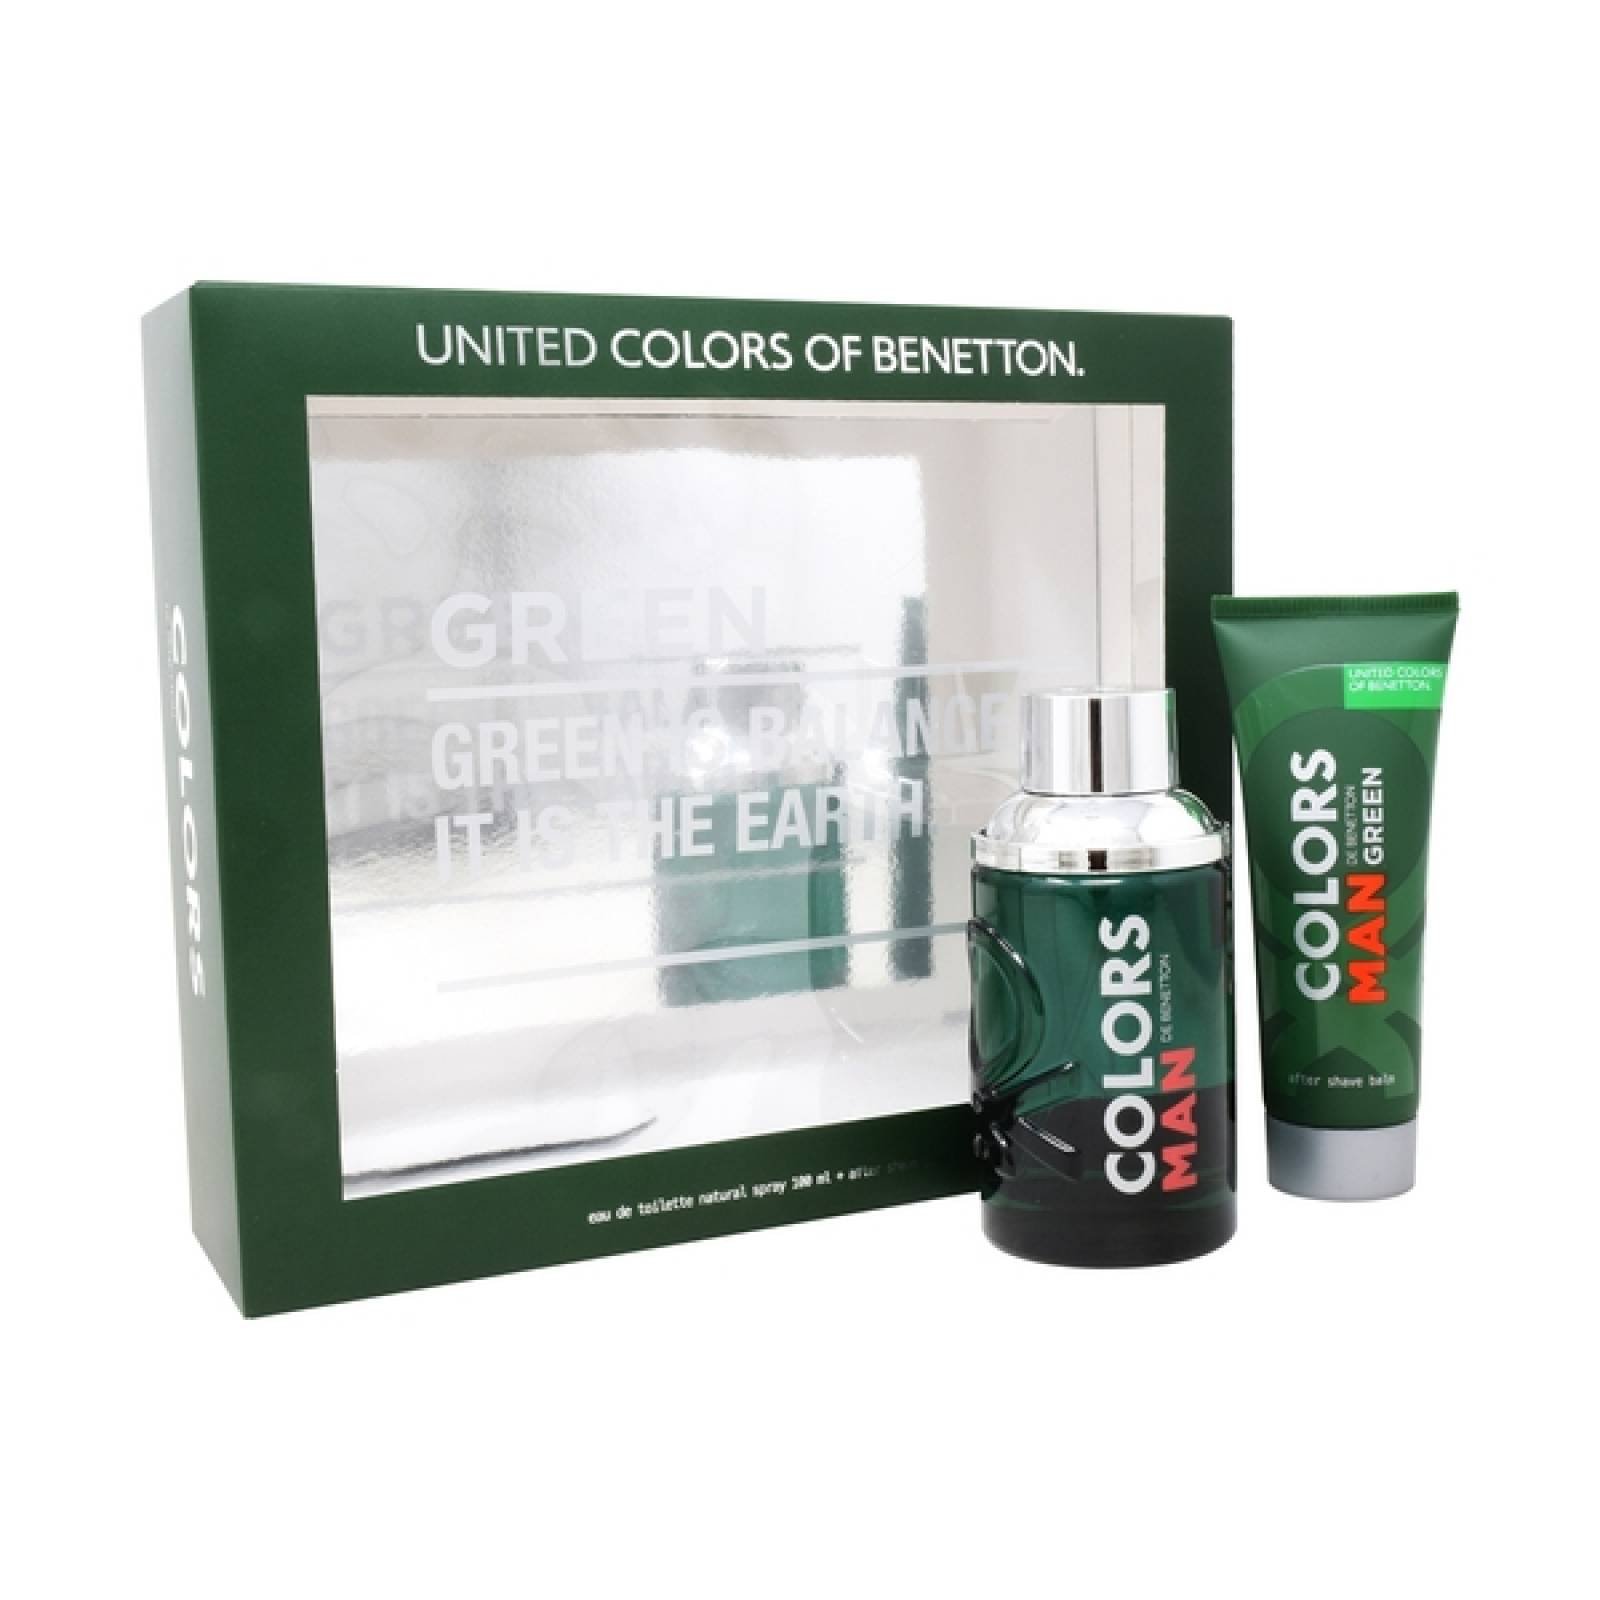 SET BENETTON COLORS GREEN MAN 2PZS 100ML EDT SPRAY/ AFTER SHAVE 75ML CABALLERO